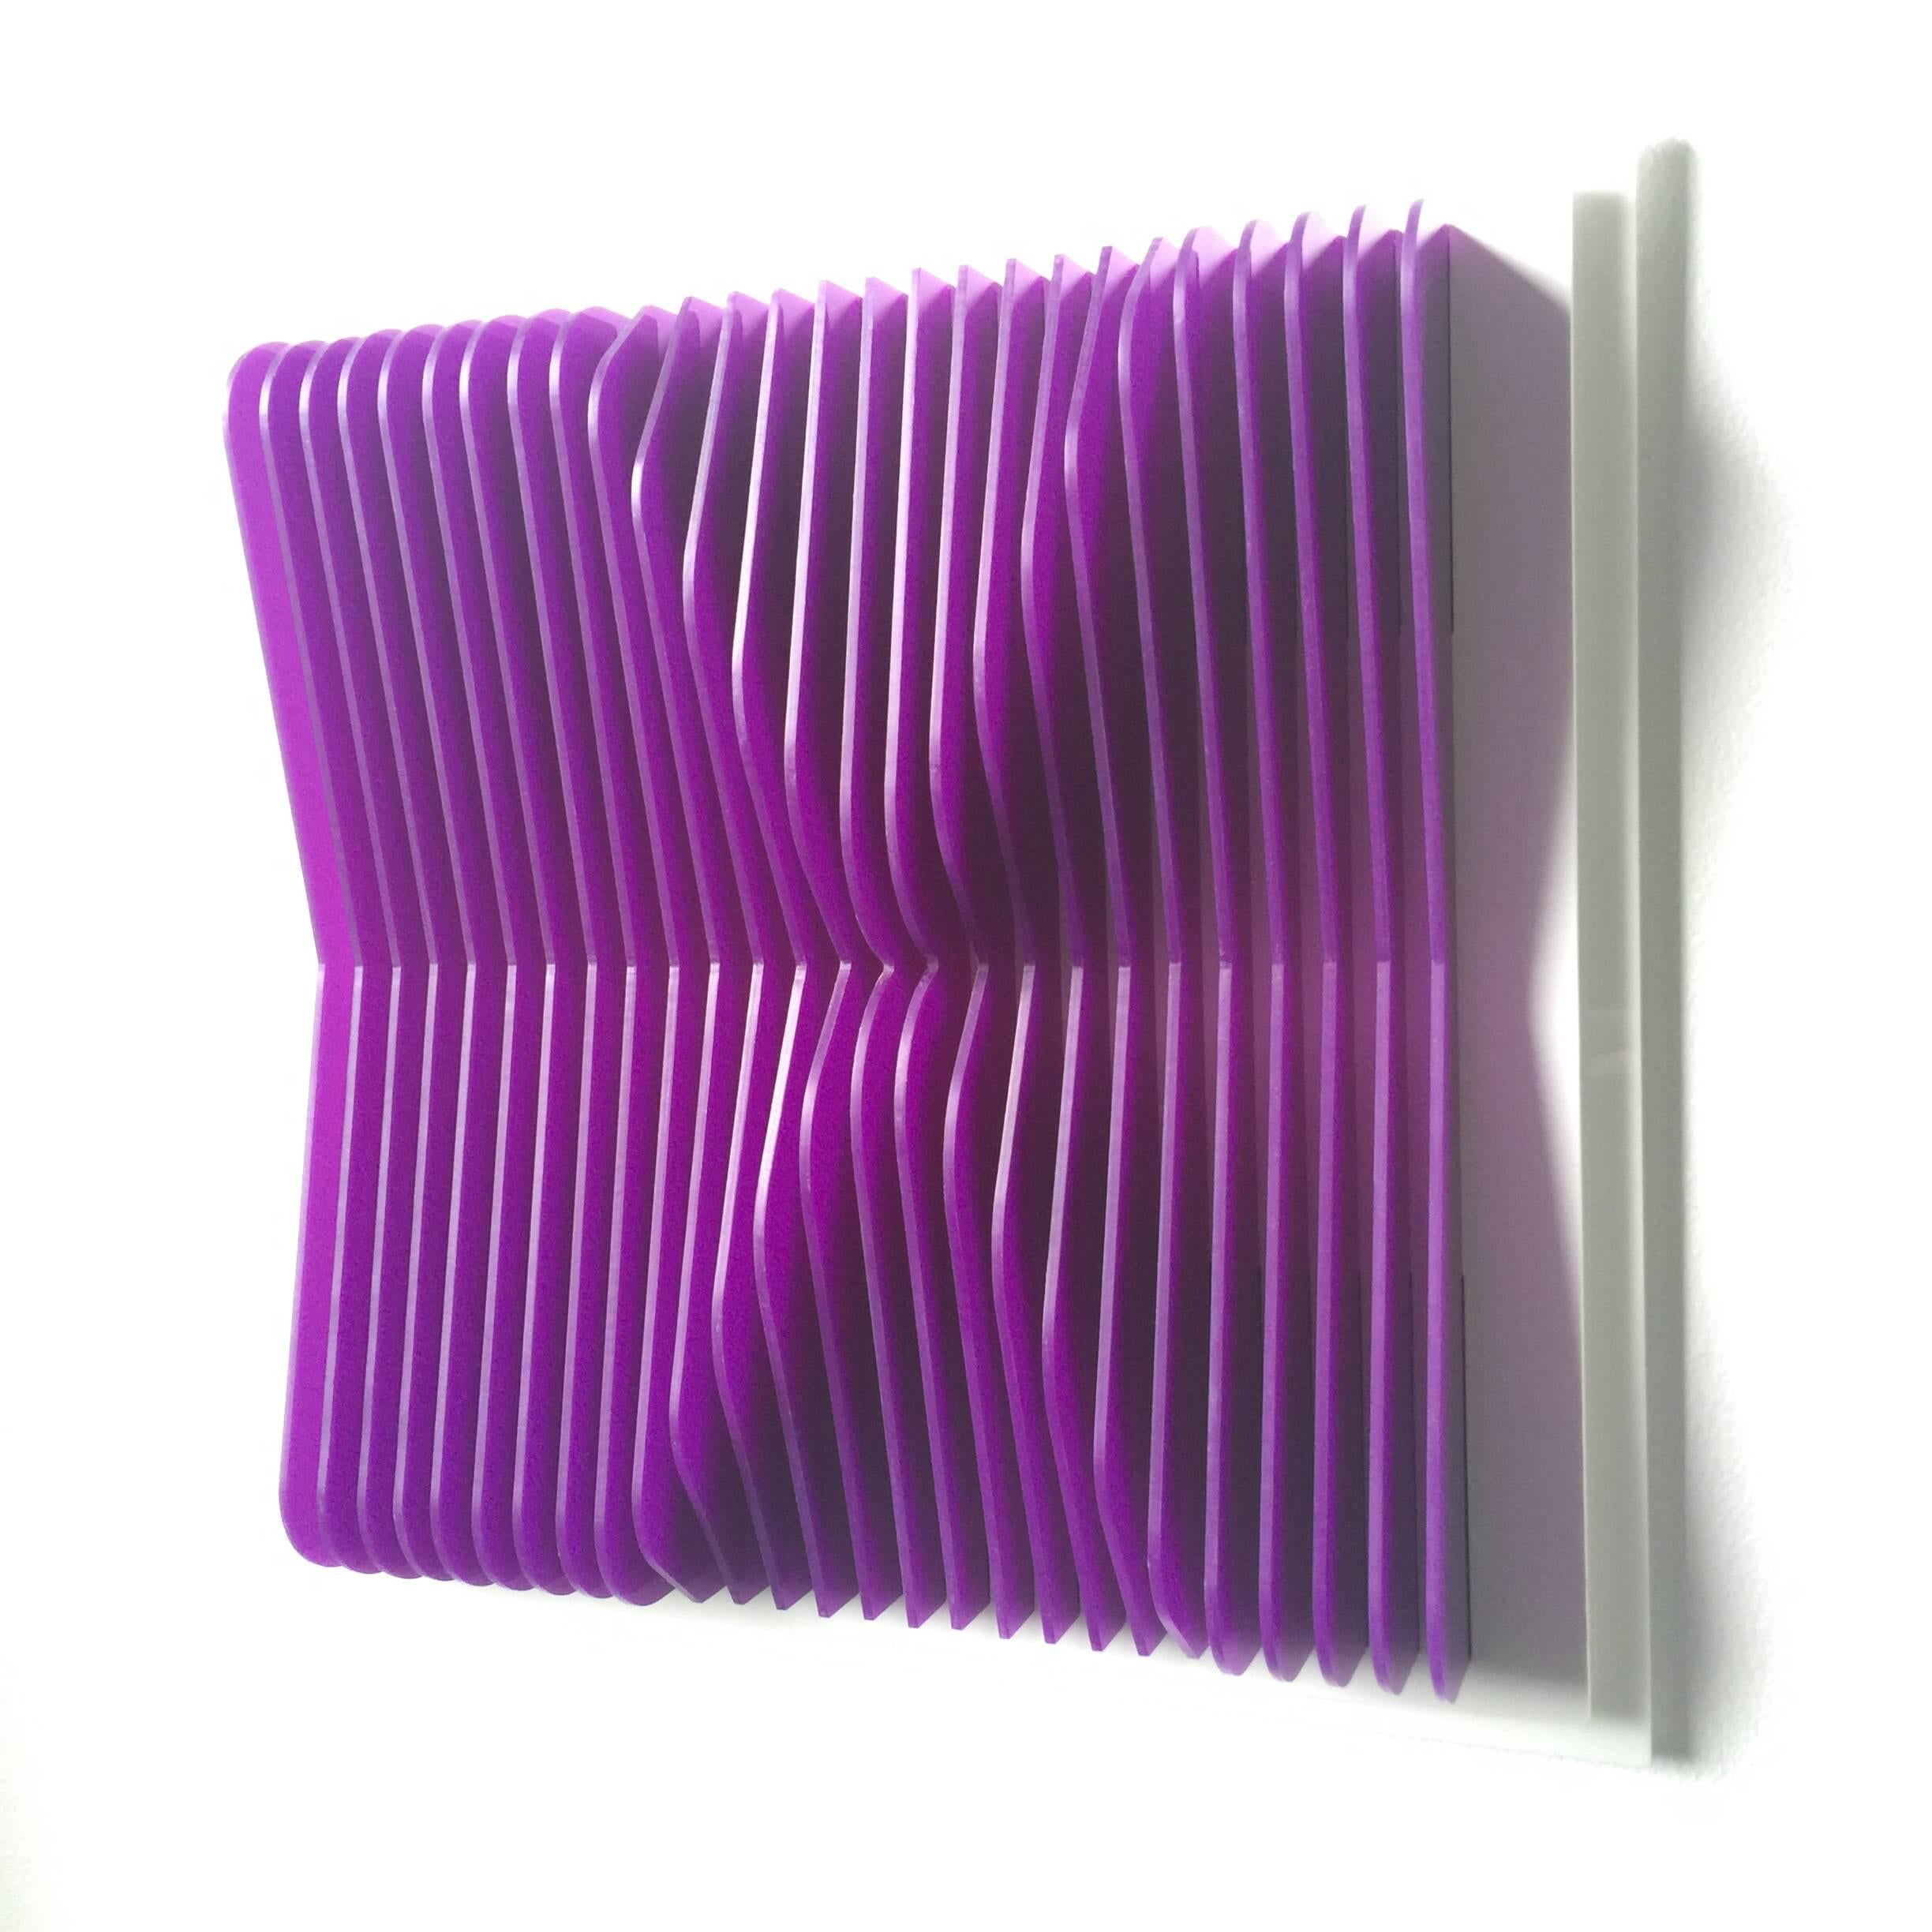 Pinched Purple - kinetic wall sculpture by J. Margulis